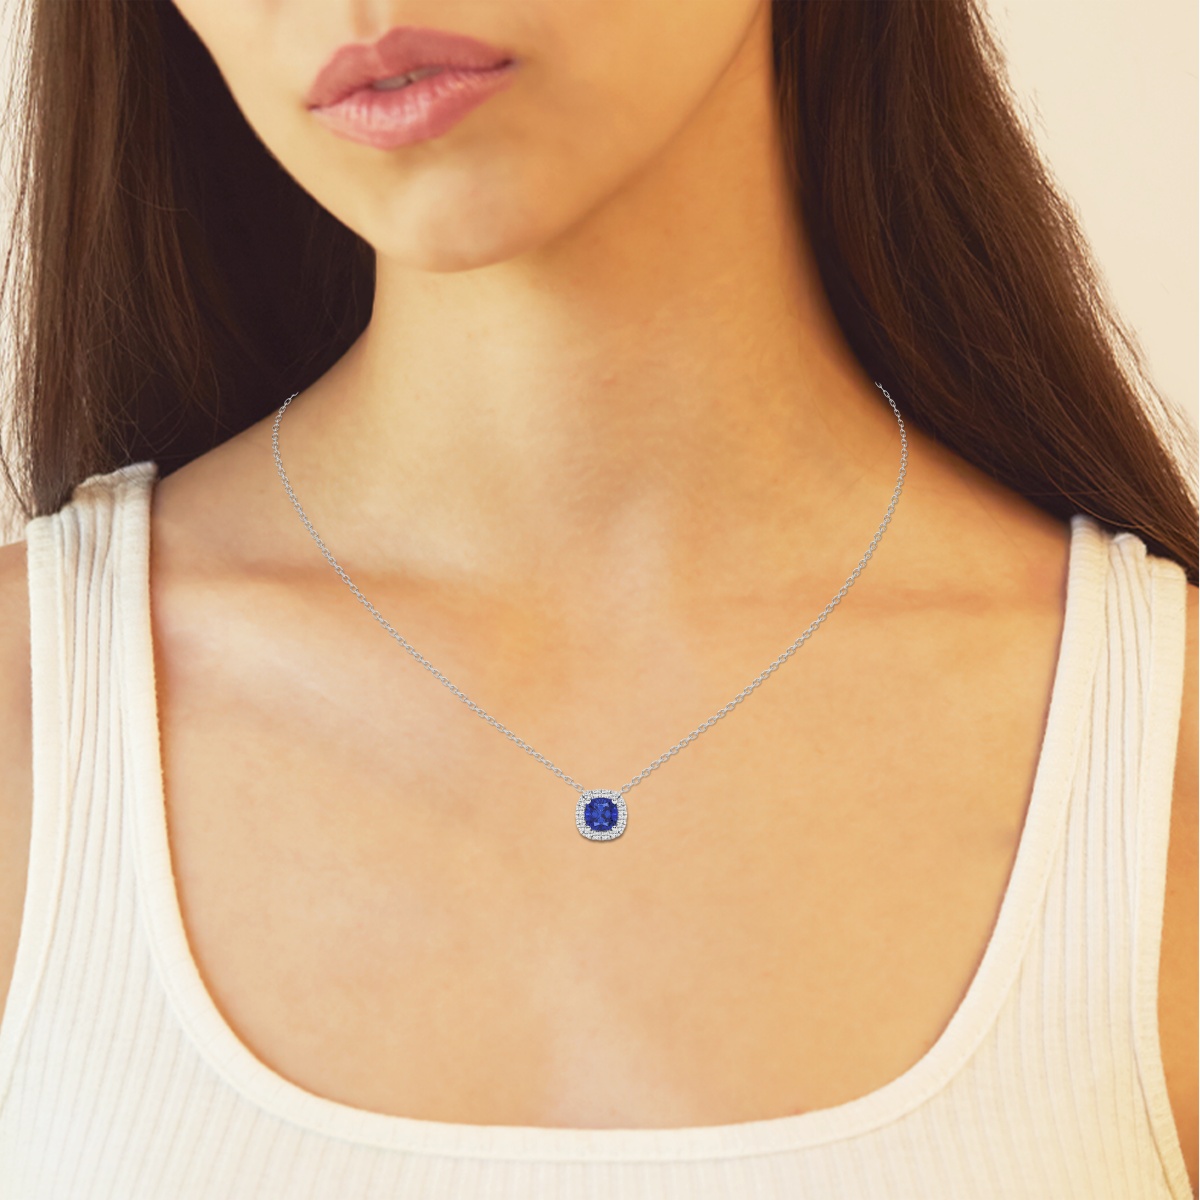 Additional Image 2 for  5.7x5.5 mm Cushion Cut Created Sapphire and 1/5 ctw Round Lab Grown Diamond Halo Pendant with Adjustable Chain